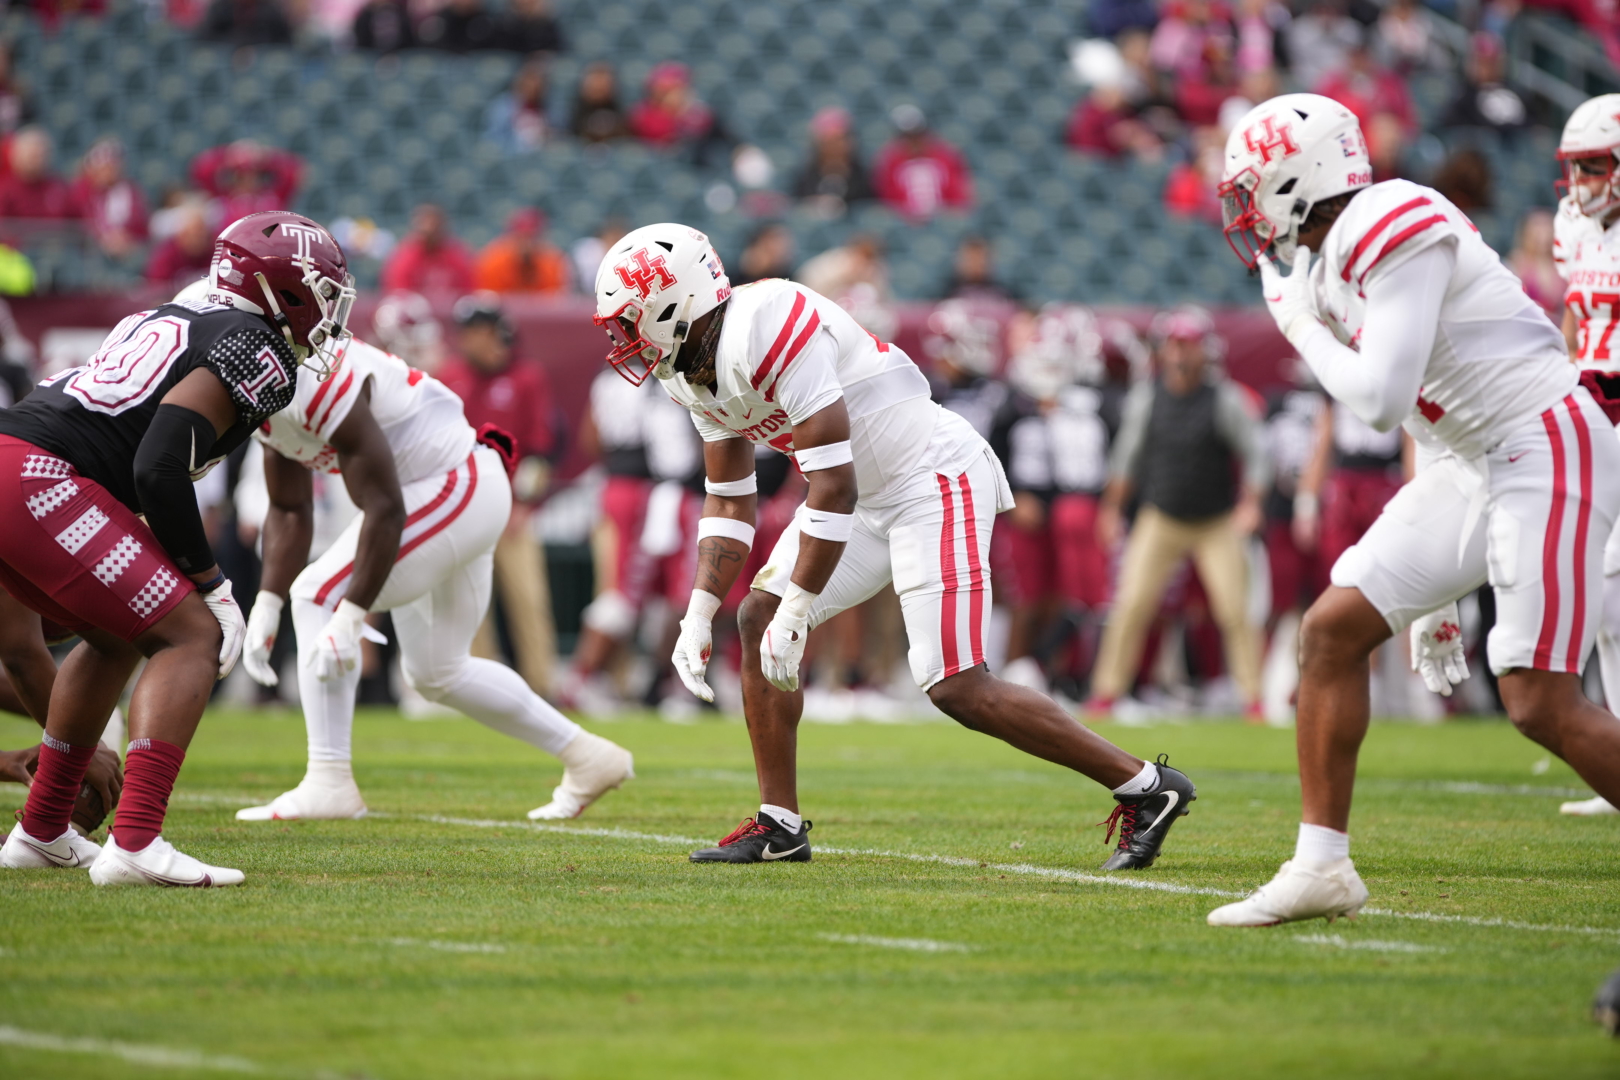 With a victory over Memphis on Friday night, the 2021 UH football team would become the second team in program history to go undefeated in conference play. | Courtesy of UH athletics